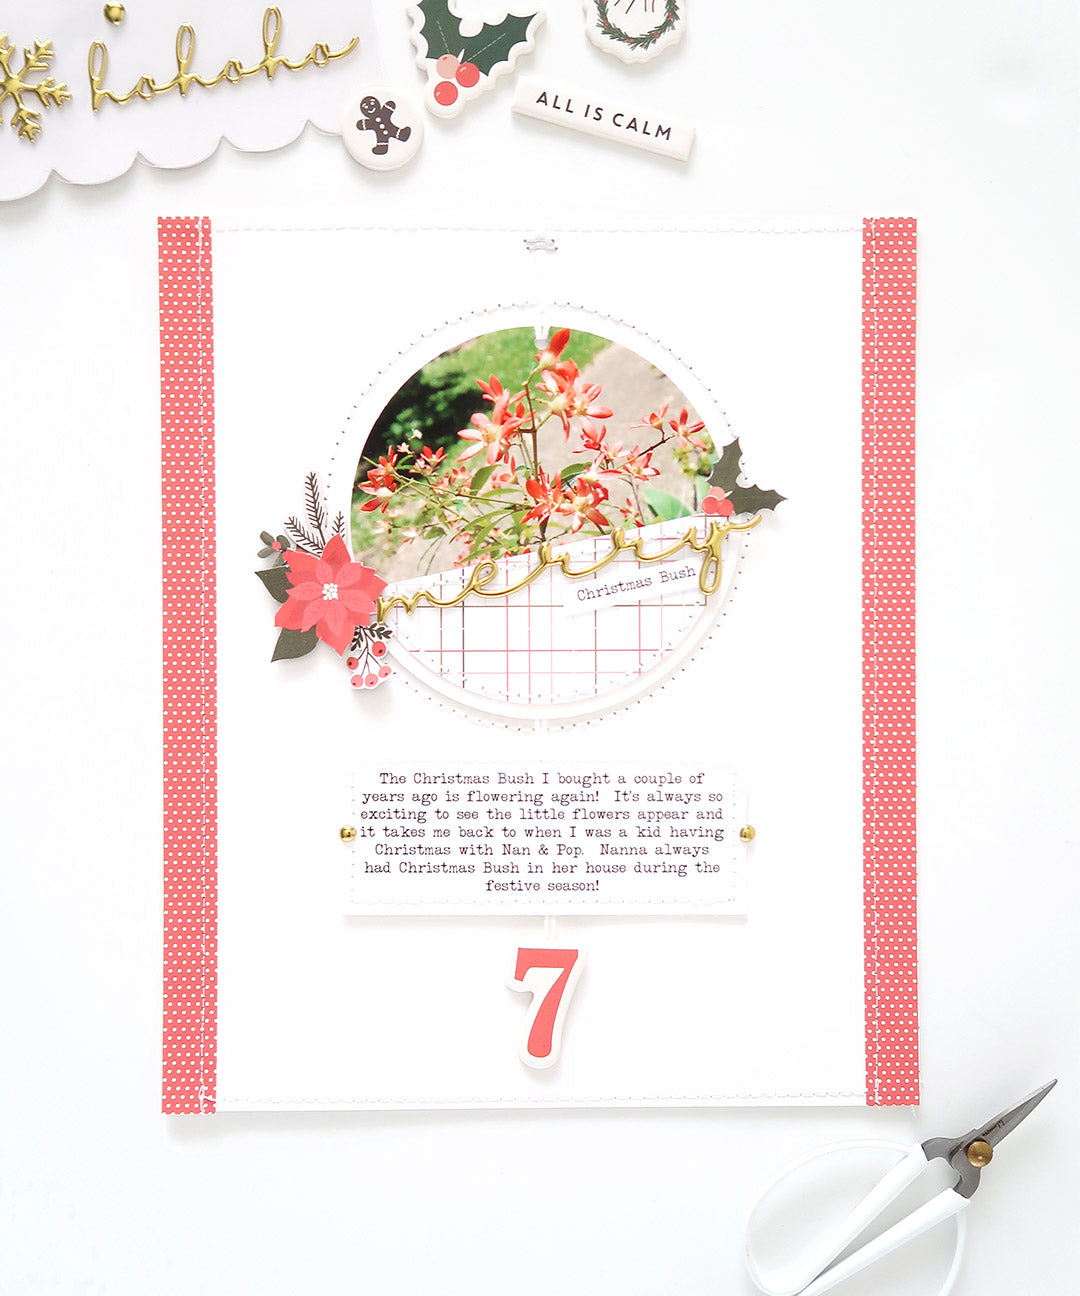 Sketch Layout by Sheree Forcier for Felicity Jane